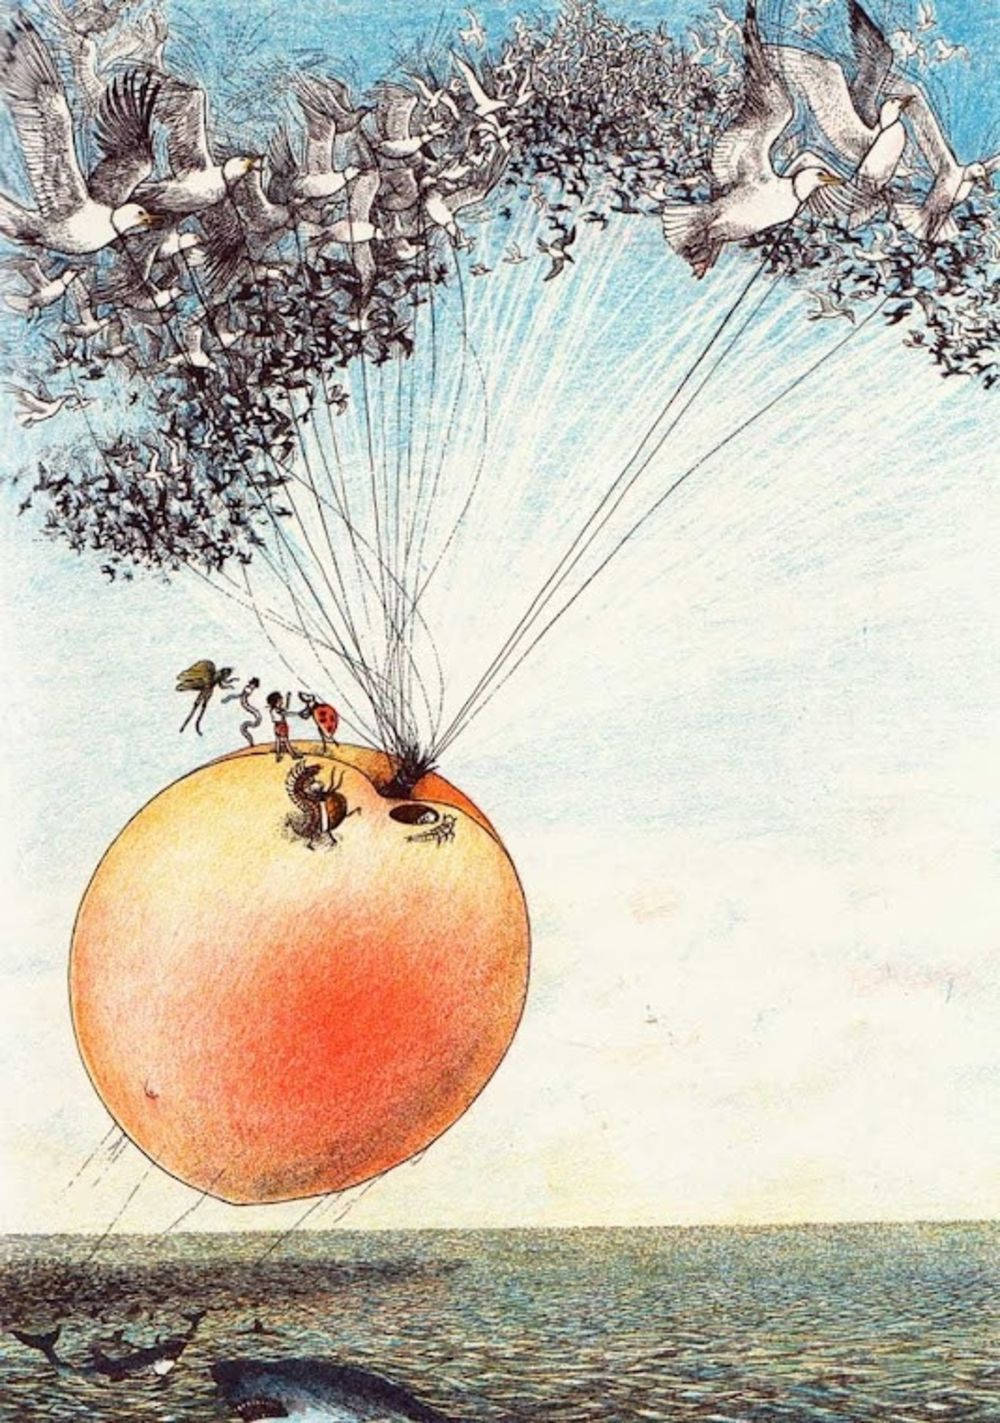 James And The Giant Peach Seagulls Wallpaper